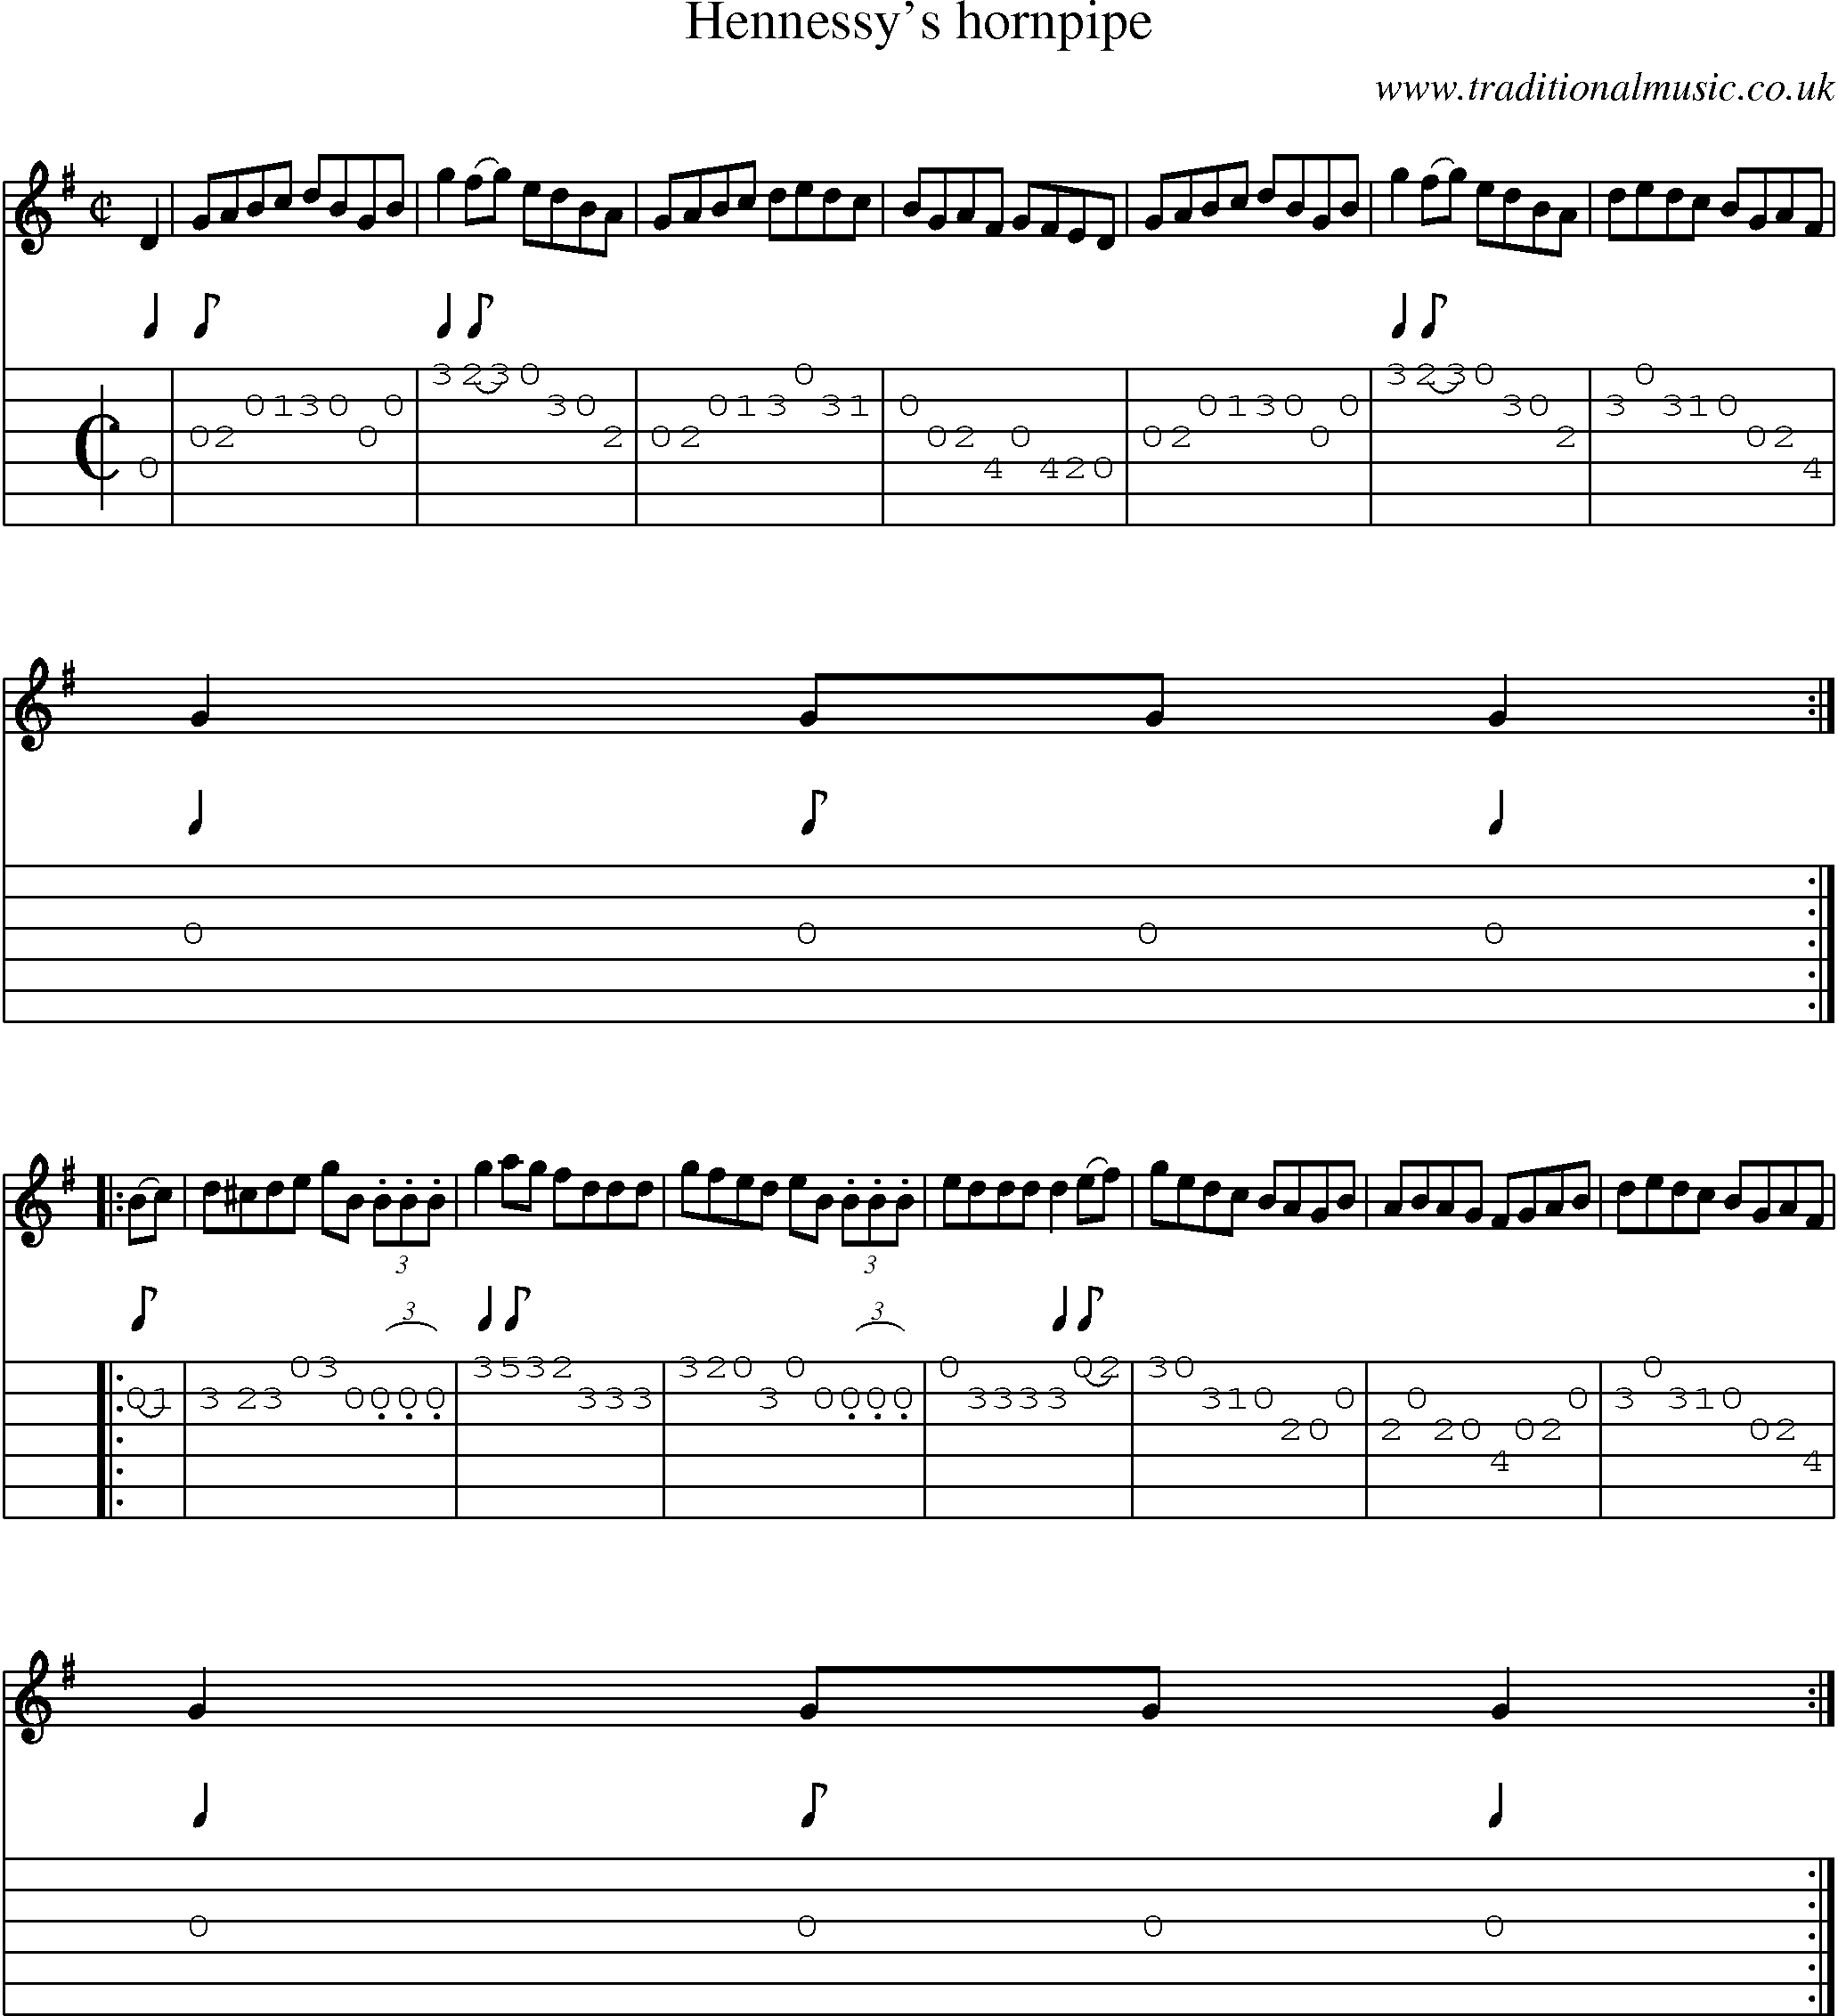 Music Score and Guitar Tabs for Hennessys Hornpipe